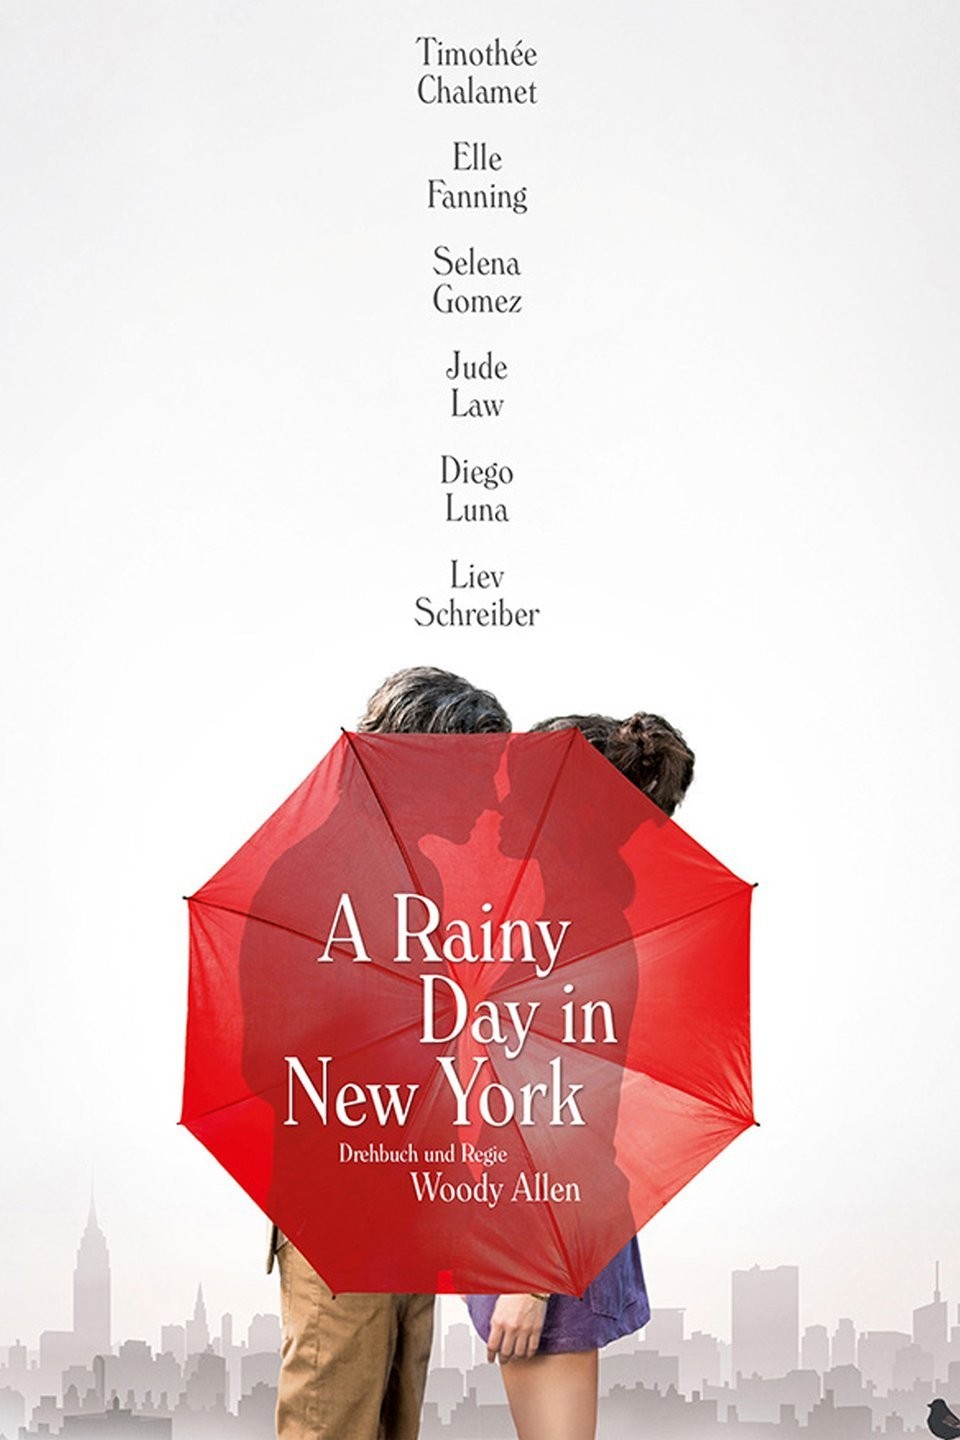 A Rainy Day in New York' Review: How to Ruin Your Weekend - The New York  Times